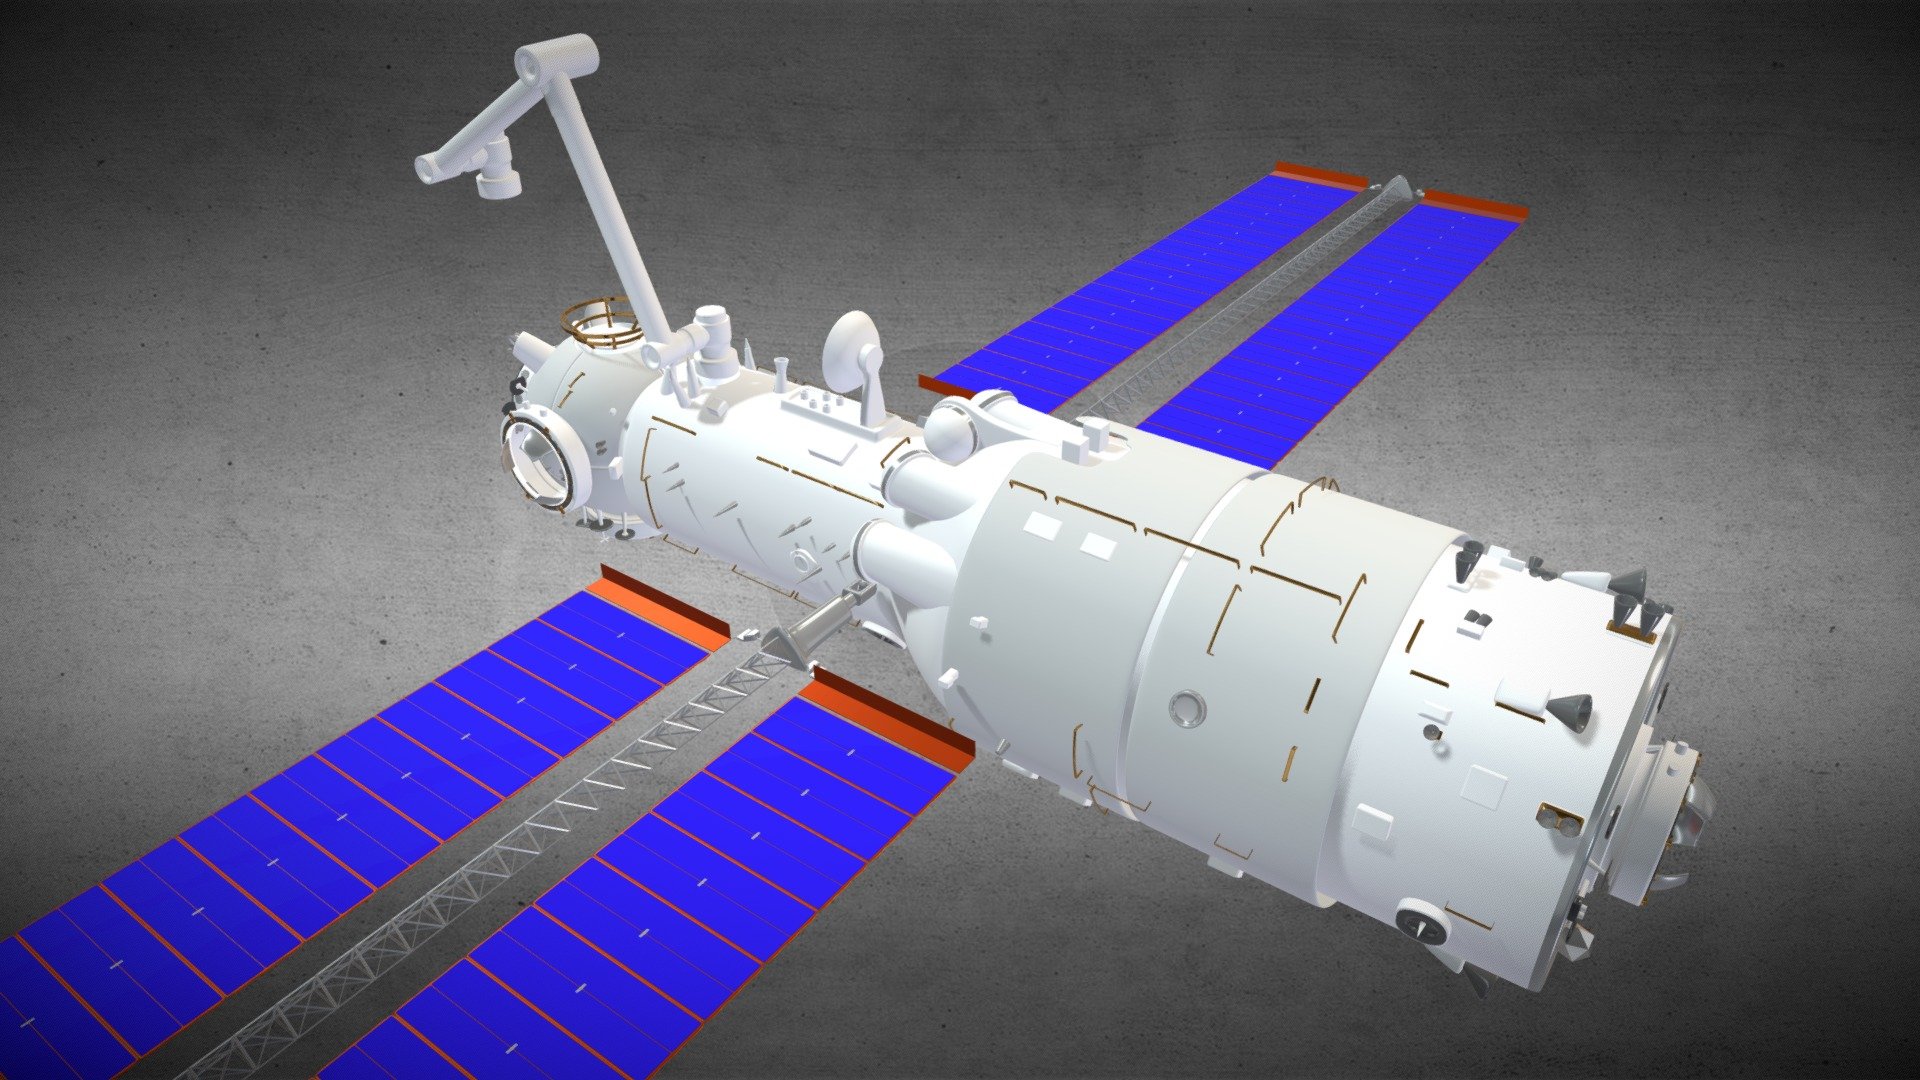 Tianhe (Chinese: 天和; pinyin: Tiānhé; lit. &lsquo;Harmony of the Heavens'),officially the Tianhe core module (Chinese: 天和核心舱), is the first module to launch of the Tiangong space station. It was launched into orbit on 29 April 2021,as the first launch of the final phase of Tiangong program, part of the China Manned Space Program (Project 921).

Tianhe follows the earlier projects Salyut, Skylab, Mir, International Space Station, Tiangong-1 and Tiangong-2 space stations. It is the first module of a third-generation Chinese modular space station. Other examples of modular station projects include the Soviet/Russian Mir and the International Space Station. Operations will be controlled from the Beijing Aerospace Flight Control Center.

In 2018, a fullscale mockup of Tianhe was publicly presented at China International Aviation &amp; Aerospace Exhibition in Zhuhai. In October 2020, China selected 18 new astronauts ahead of the space station construction to participate in the country's space station project 3d model